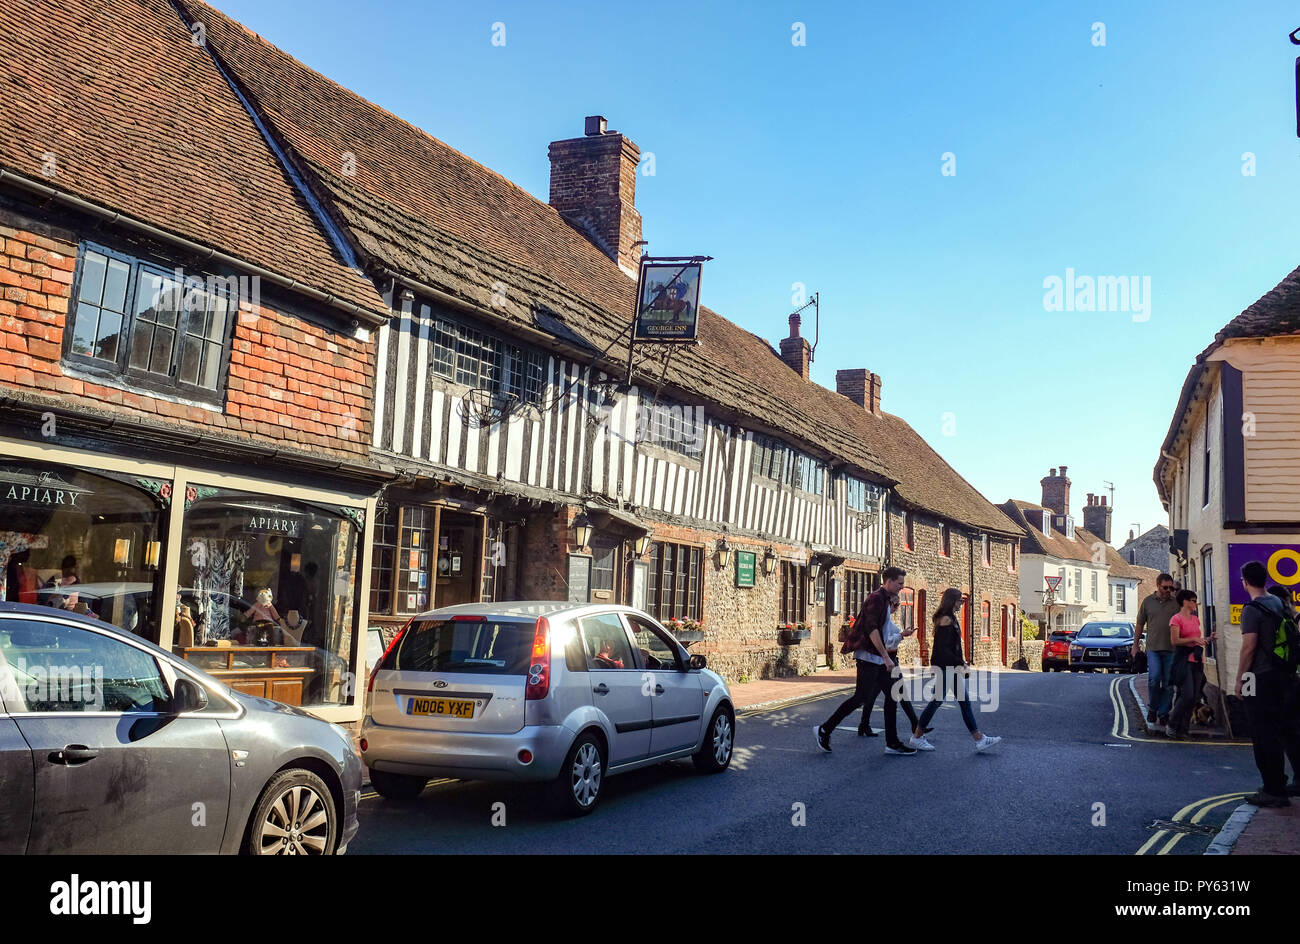 Traffic and pedestrians in the picturesque village of Alfriston East Sussex Britain UK -  Photograph taken by Simon Dack Stock Photo